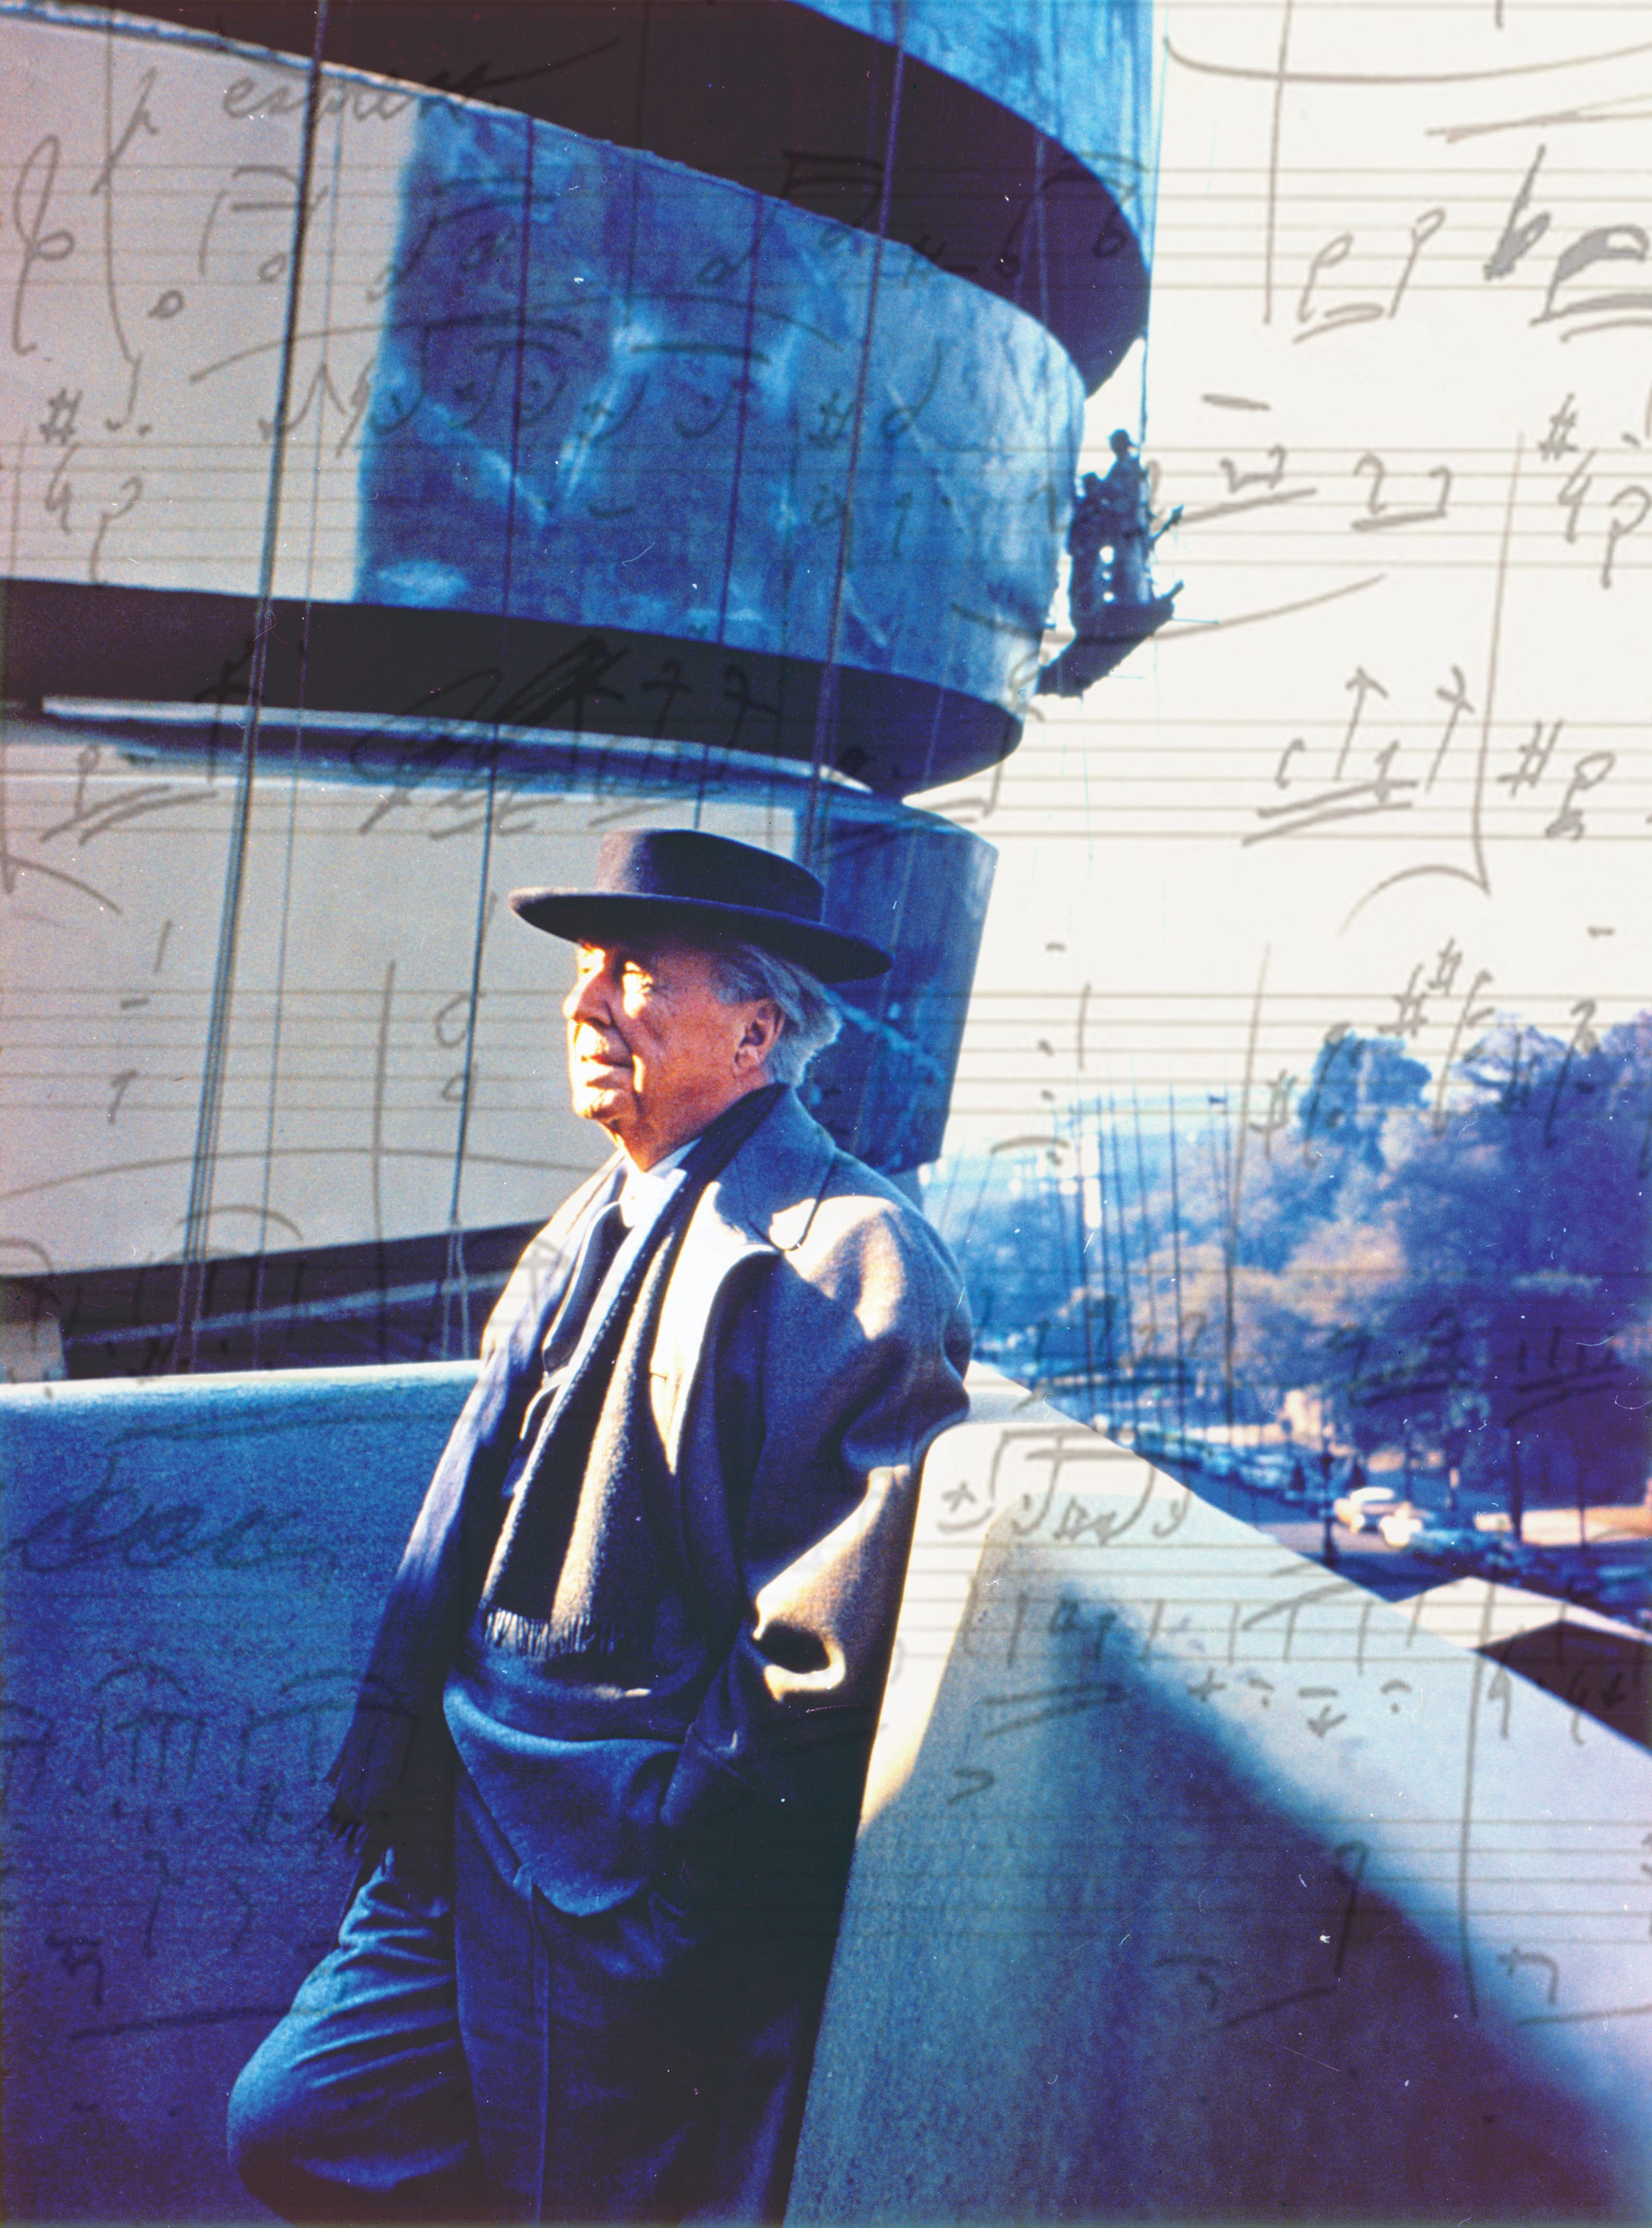 Sheet music by Palestrina overlays an image of Wright at the Guggenheim. Collage by Brie Flewelling.